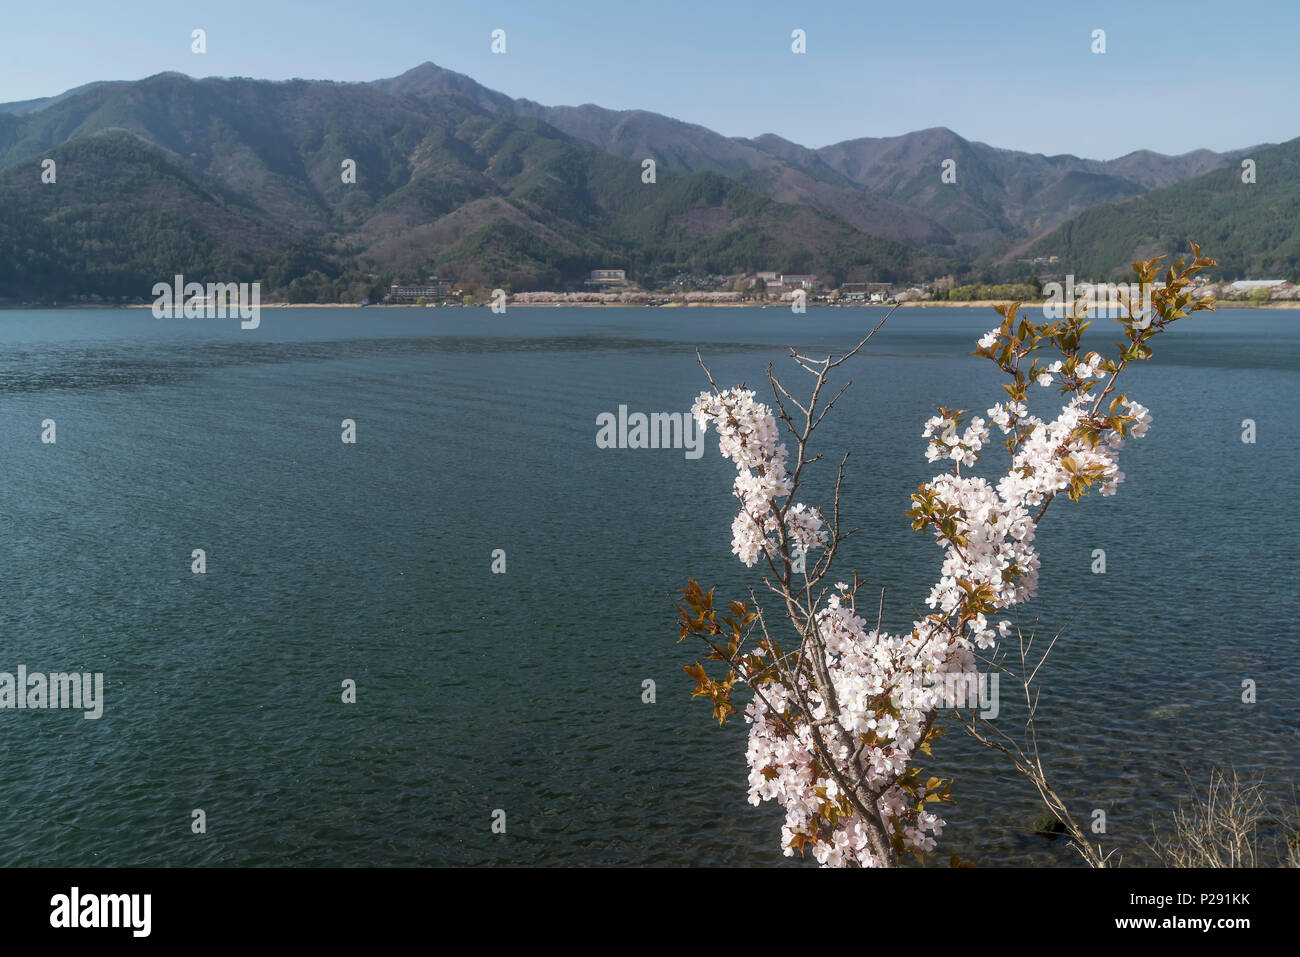 Blooming branch with Kawaguchi Lake in the background, Yamanashi Prefecture, Japan Stock Photo